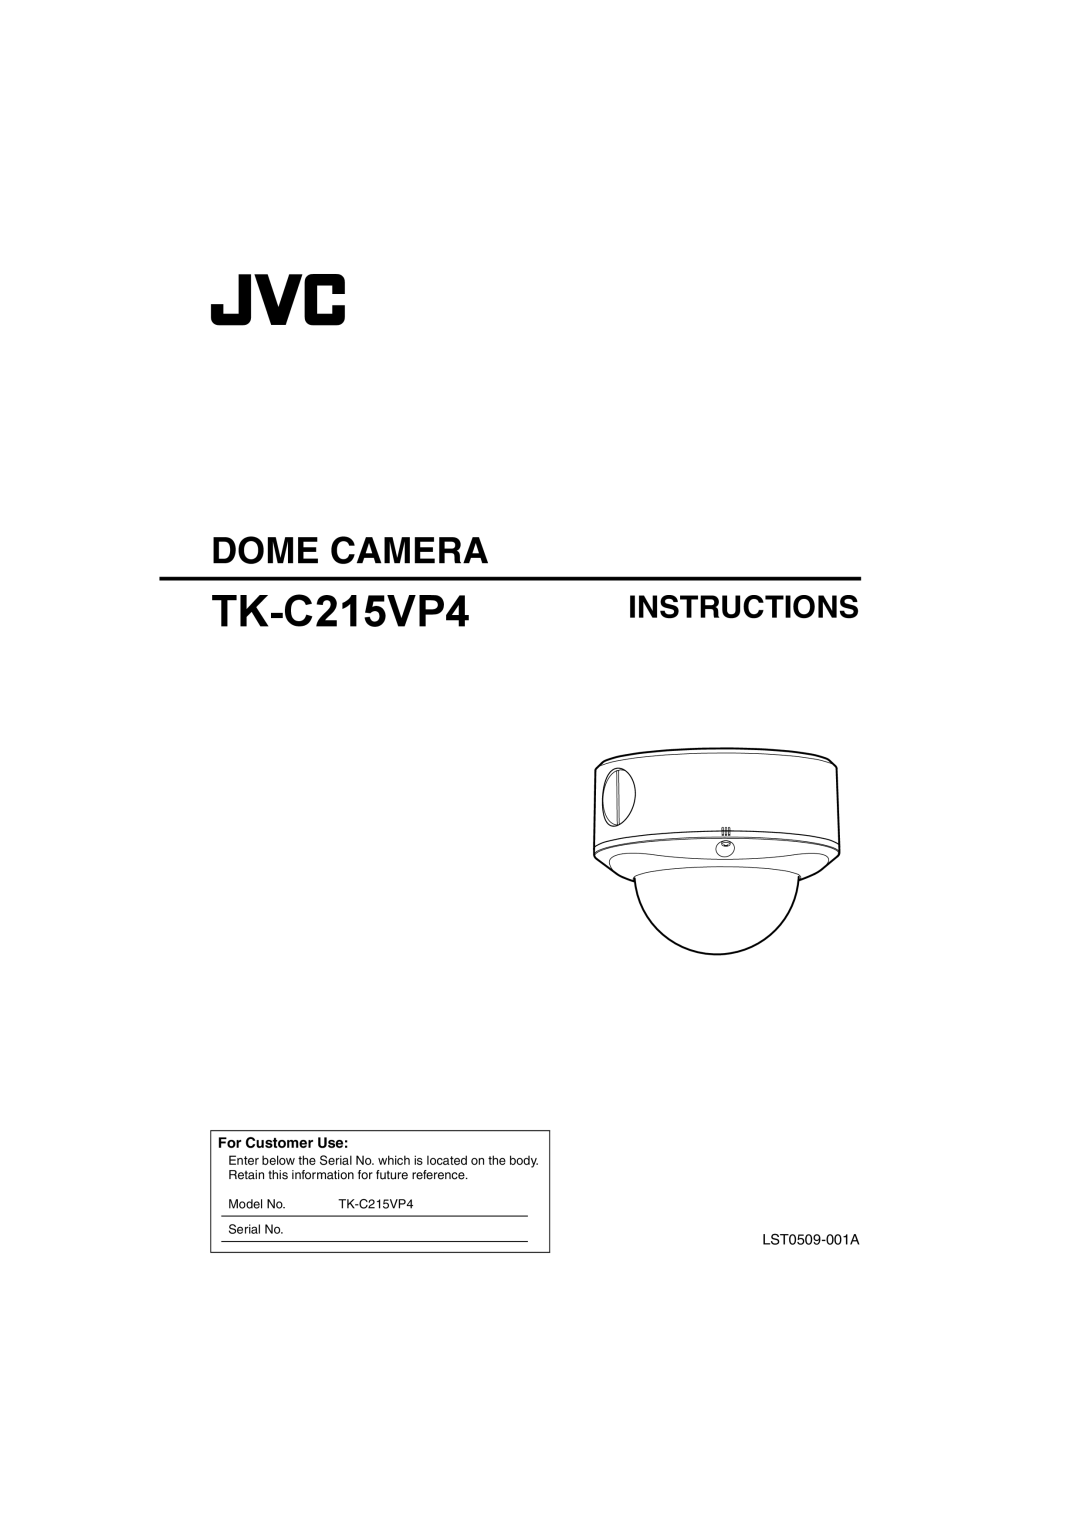 JVC TK-C215VP4 For Customer Use, Dome Camera, Instructions, Enter below the Serial No. which is located on the body 